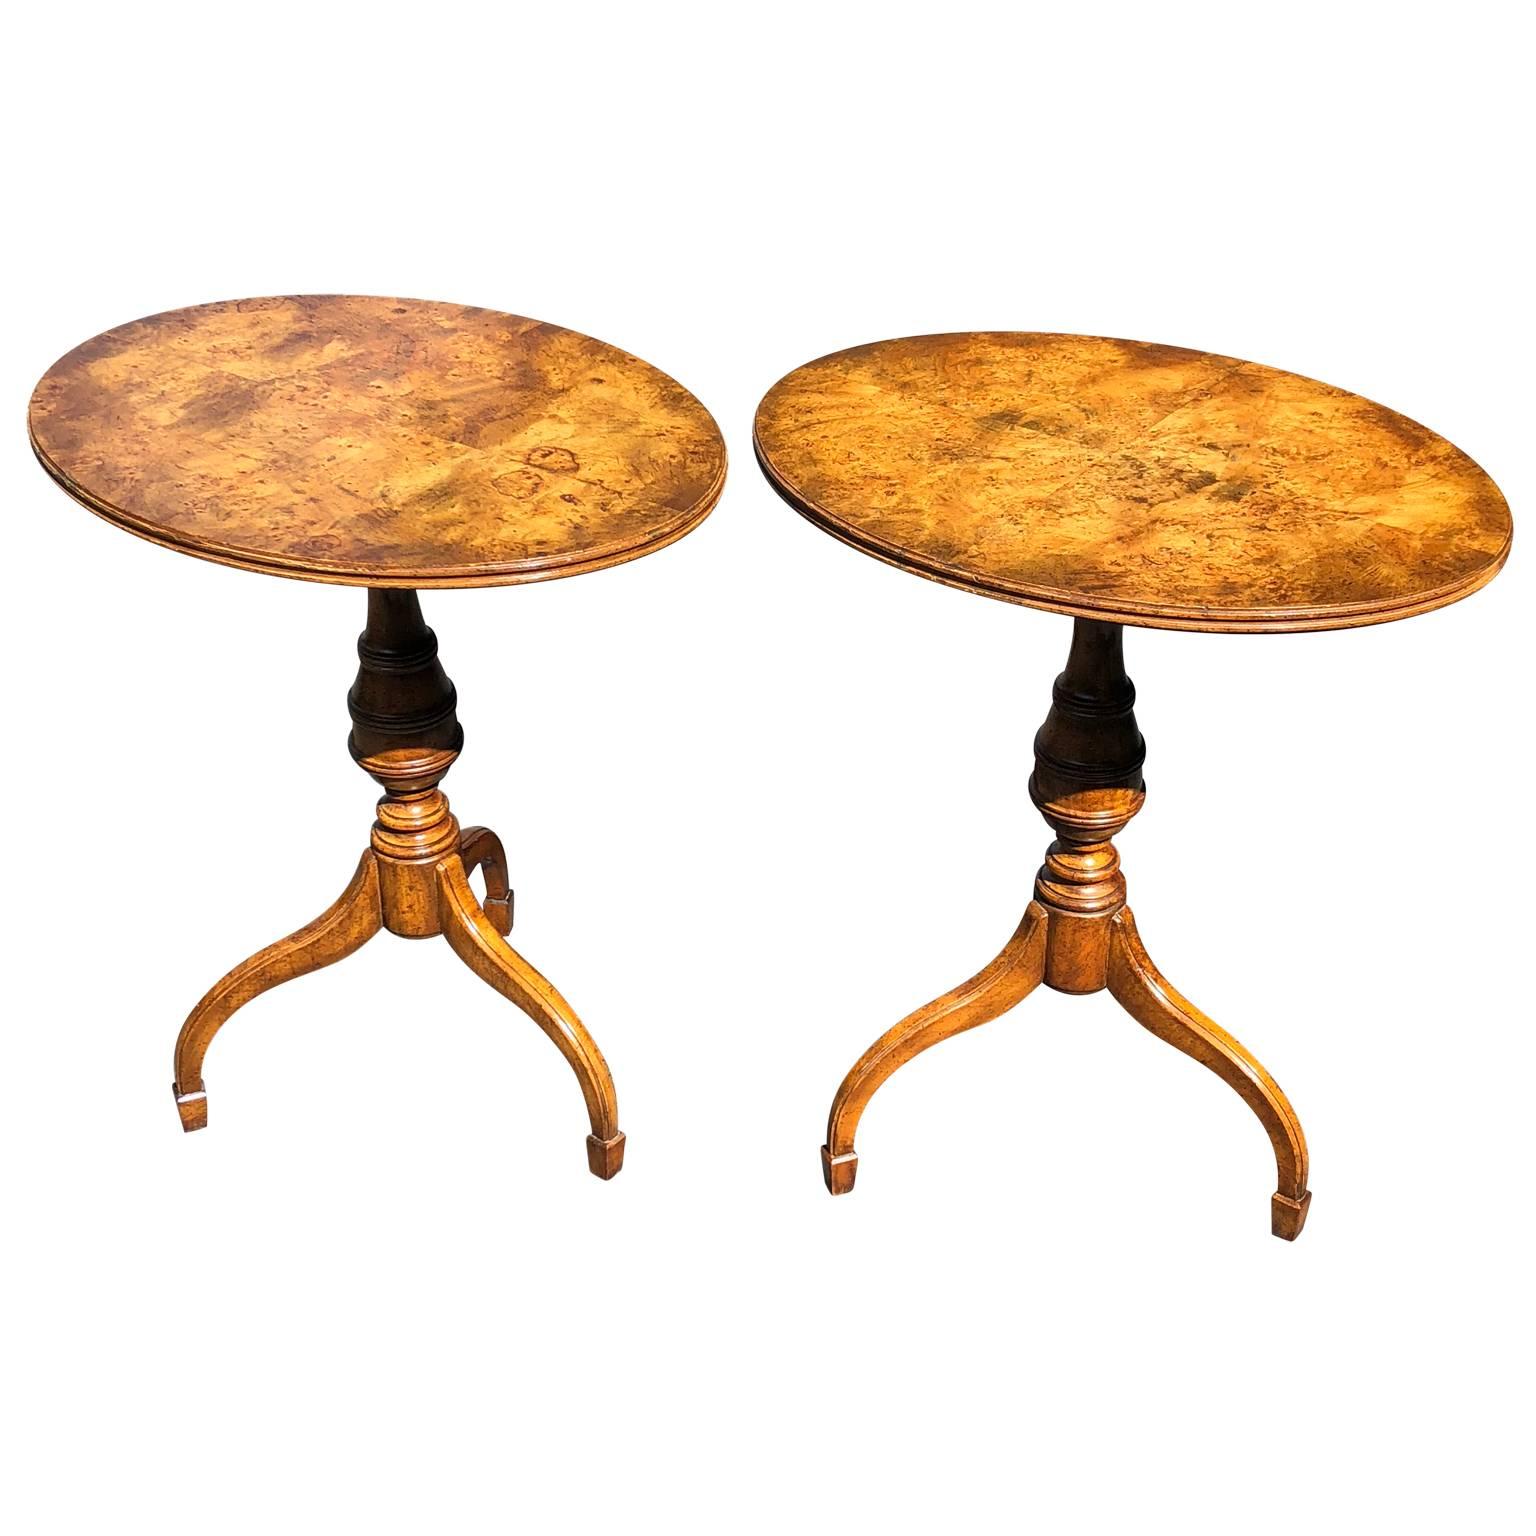 Pair of Mid-Century Modern Burl Wood Lamp or Side Tables by Weiman